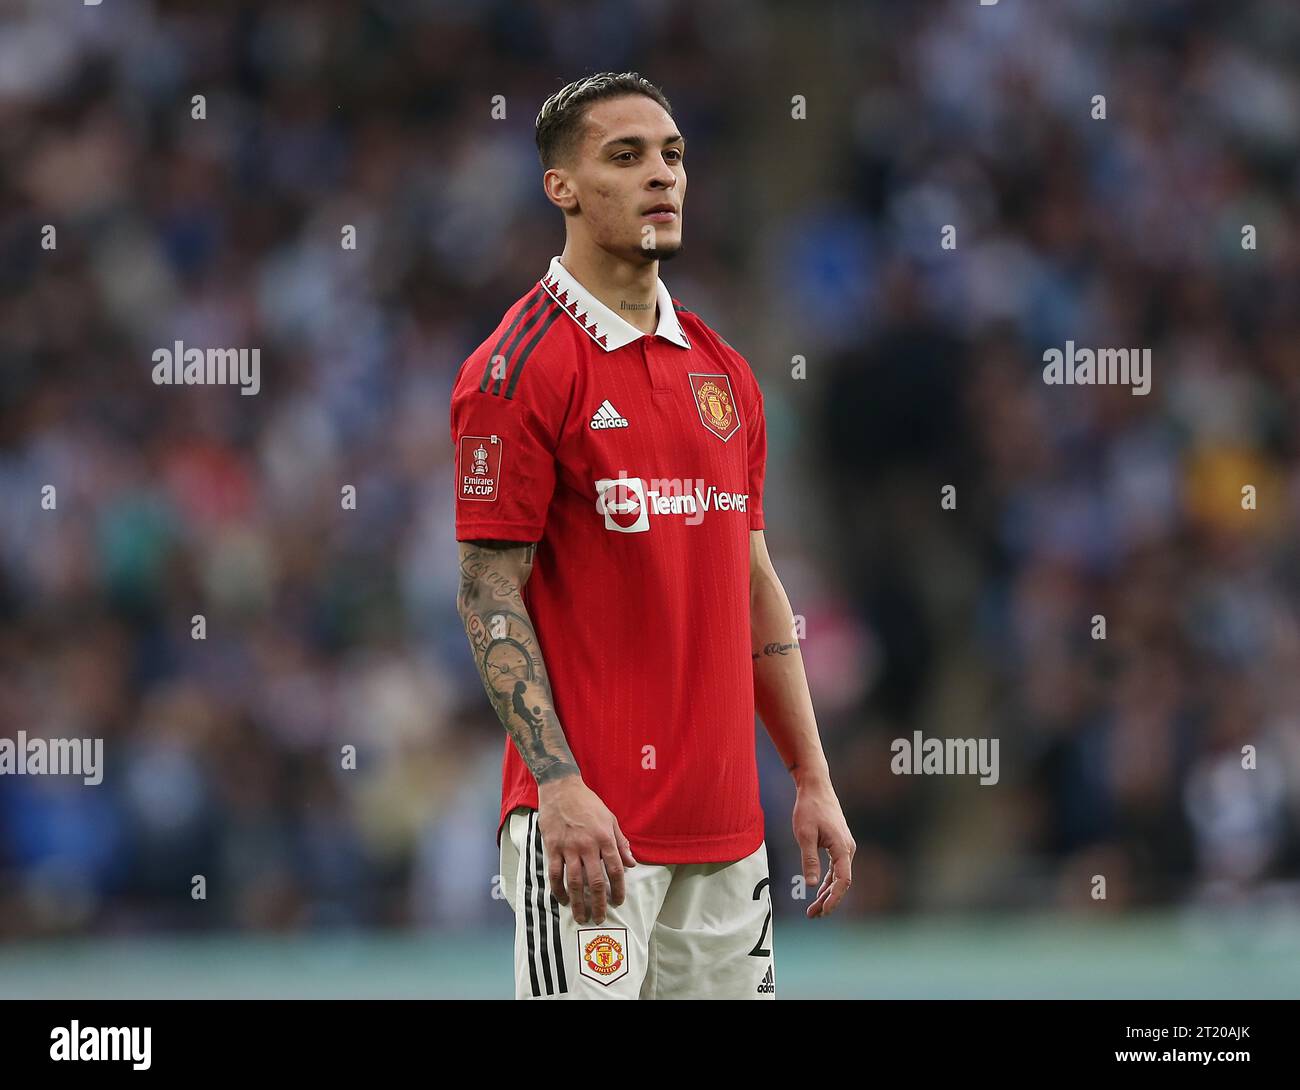 Antony of Manchester United. - Brighton & Hove Albion v Manchester United, The Emirates FA Cup Semi Final, Wembley Stadium, London, UK - 23rd April 2023. Editorial Use Only - DataCo restrictions apply. Stock Photo